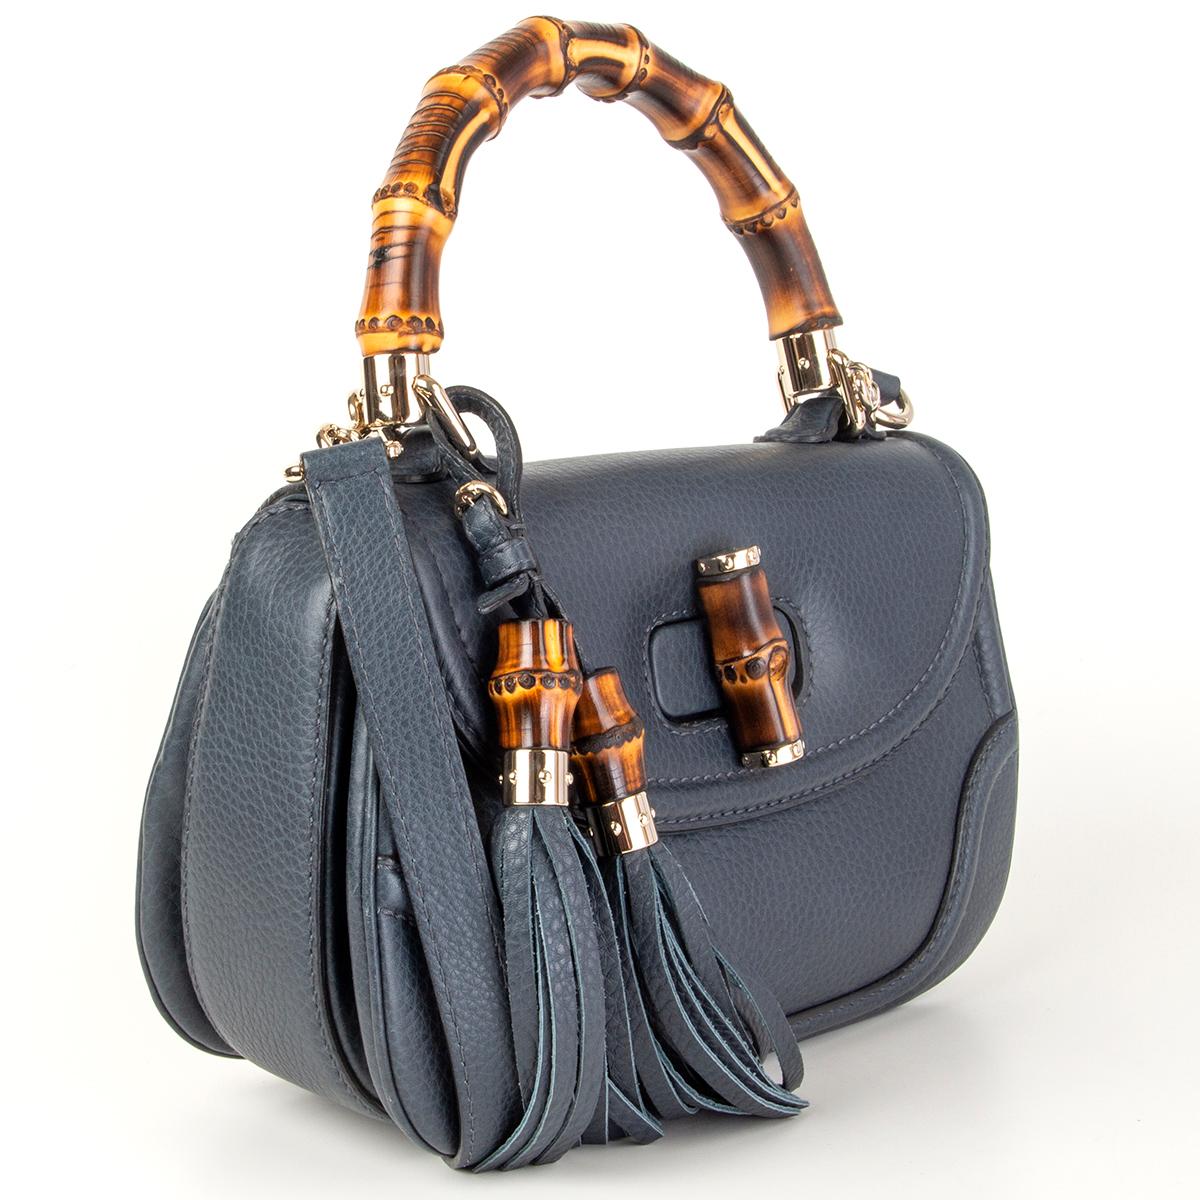 Gucci 'New Bamboo Medium' top-handle shoulder bag in navy blue grained calfskin. Opens with a bamboo turn-lock and is lined in off-white suede with one zip pocket against the back and one open pocket against the front. Comes with a detachable